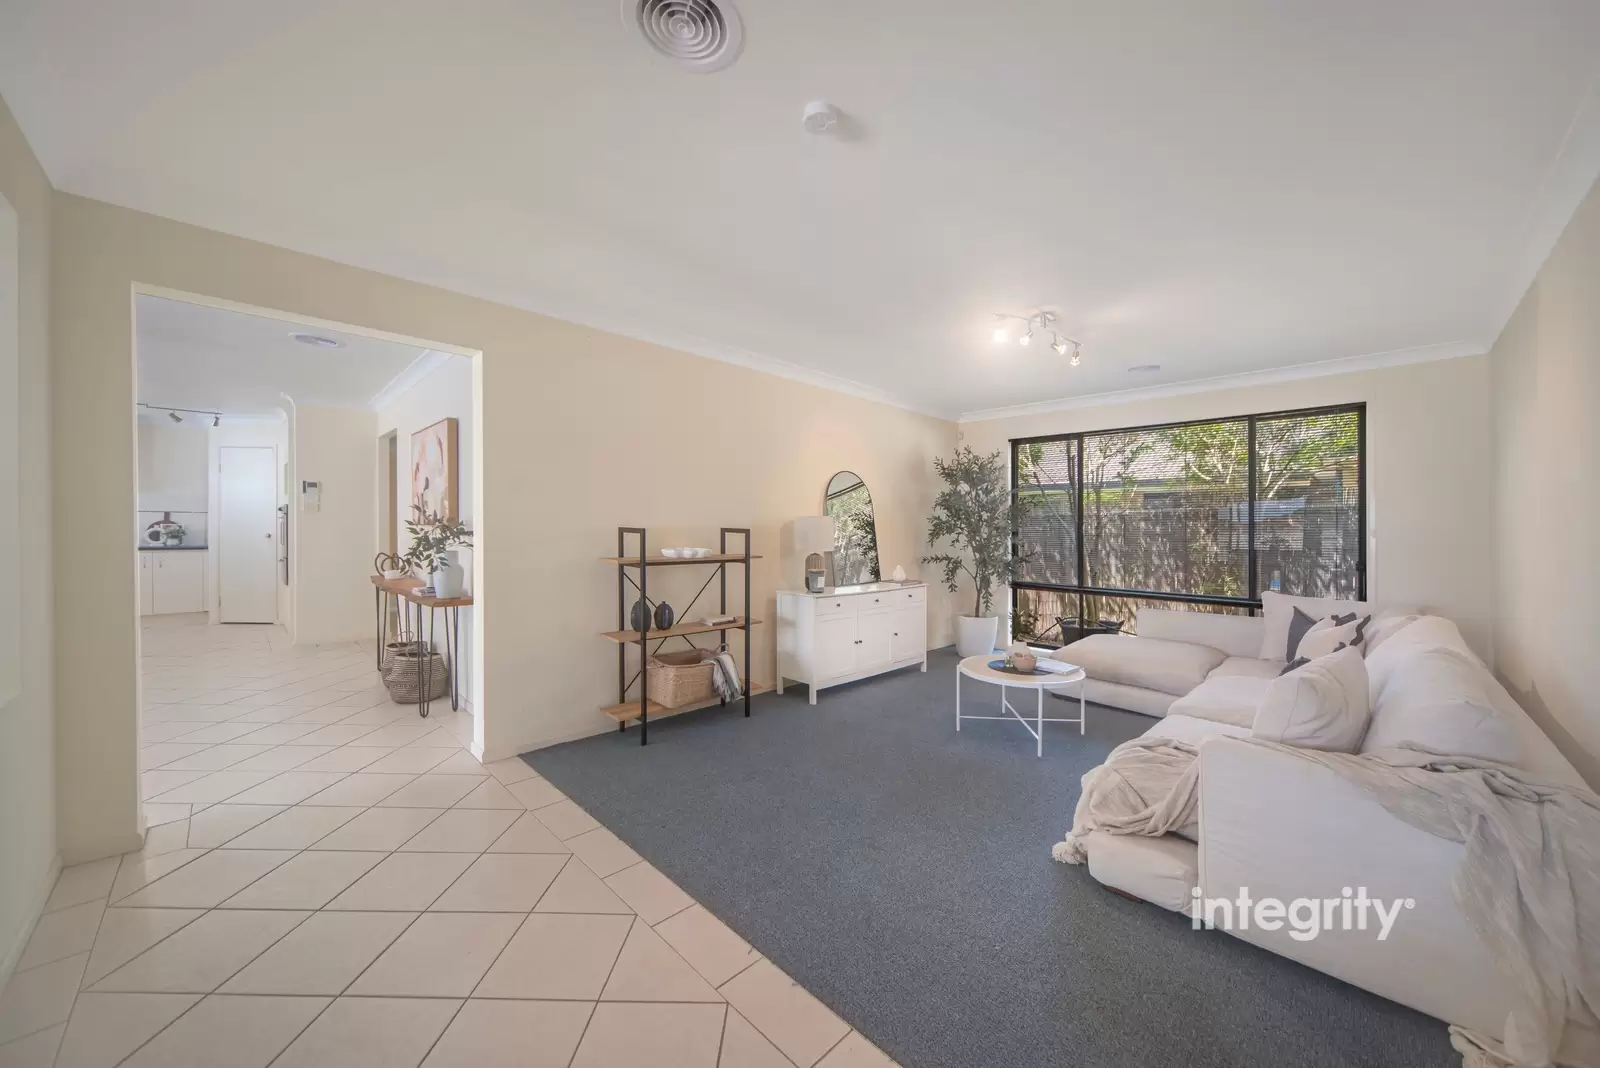 32 The Garden Walk, Worrigee For Sale by Integrity Real Estate - image 5